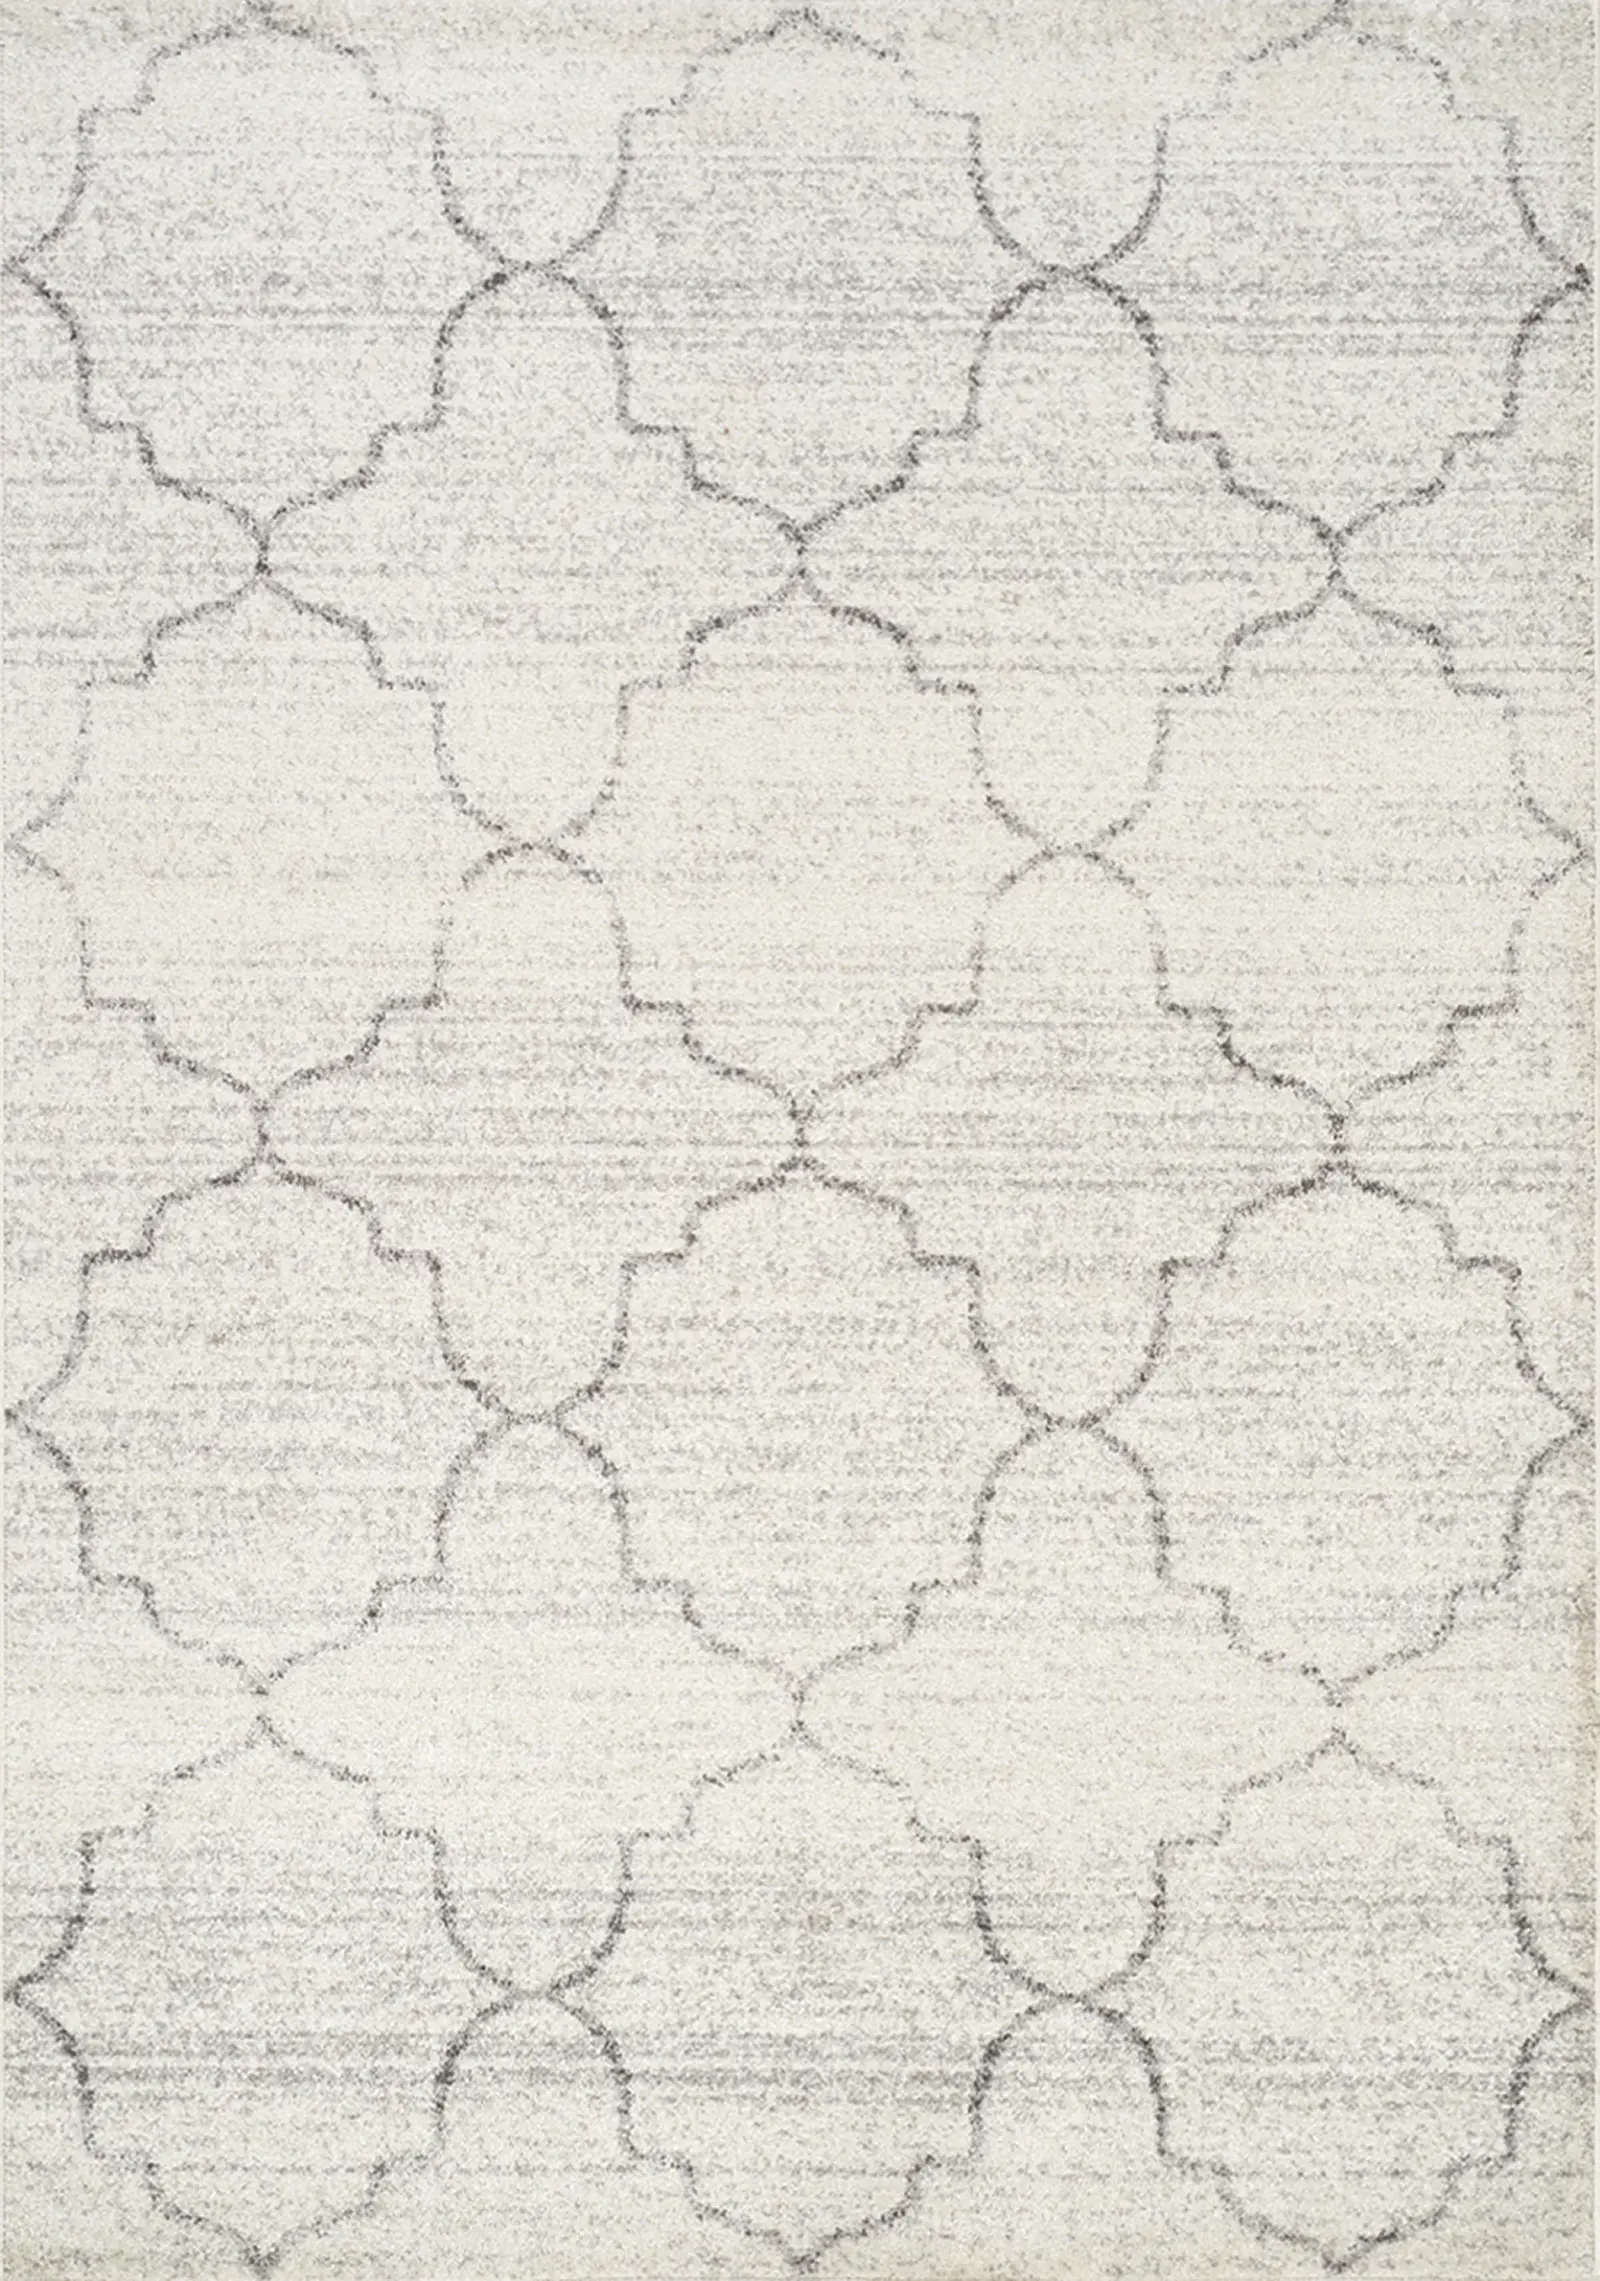 5 x 8 Medium Ogee White and Gray Area Rug - Focus